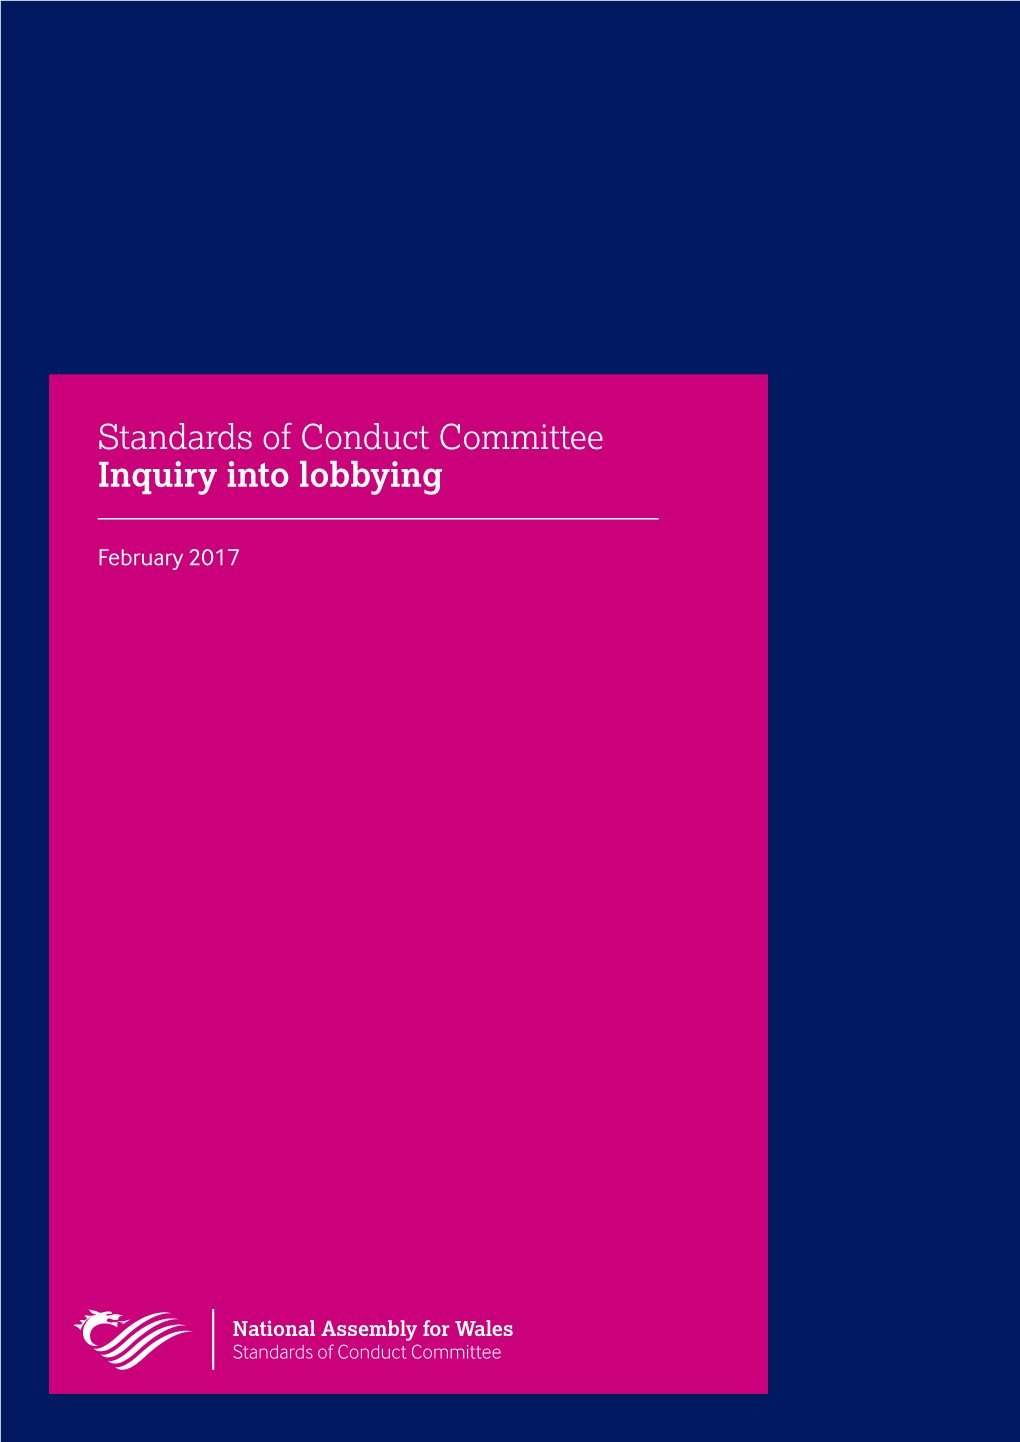 Standards of Conduct Committee Inquiry Into Lobbying